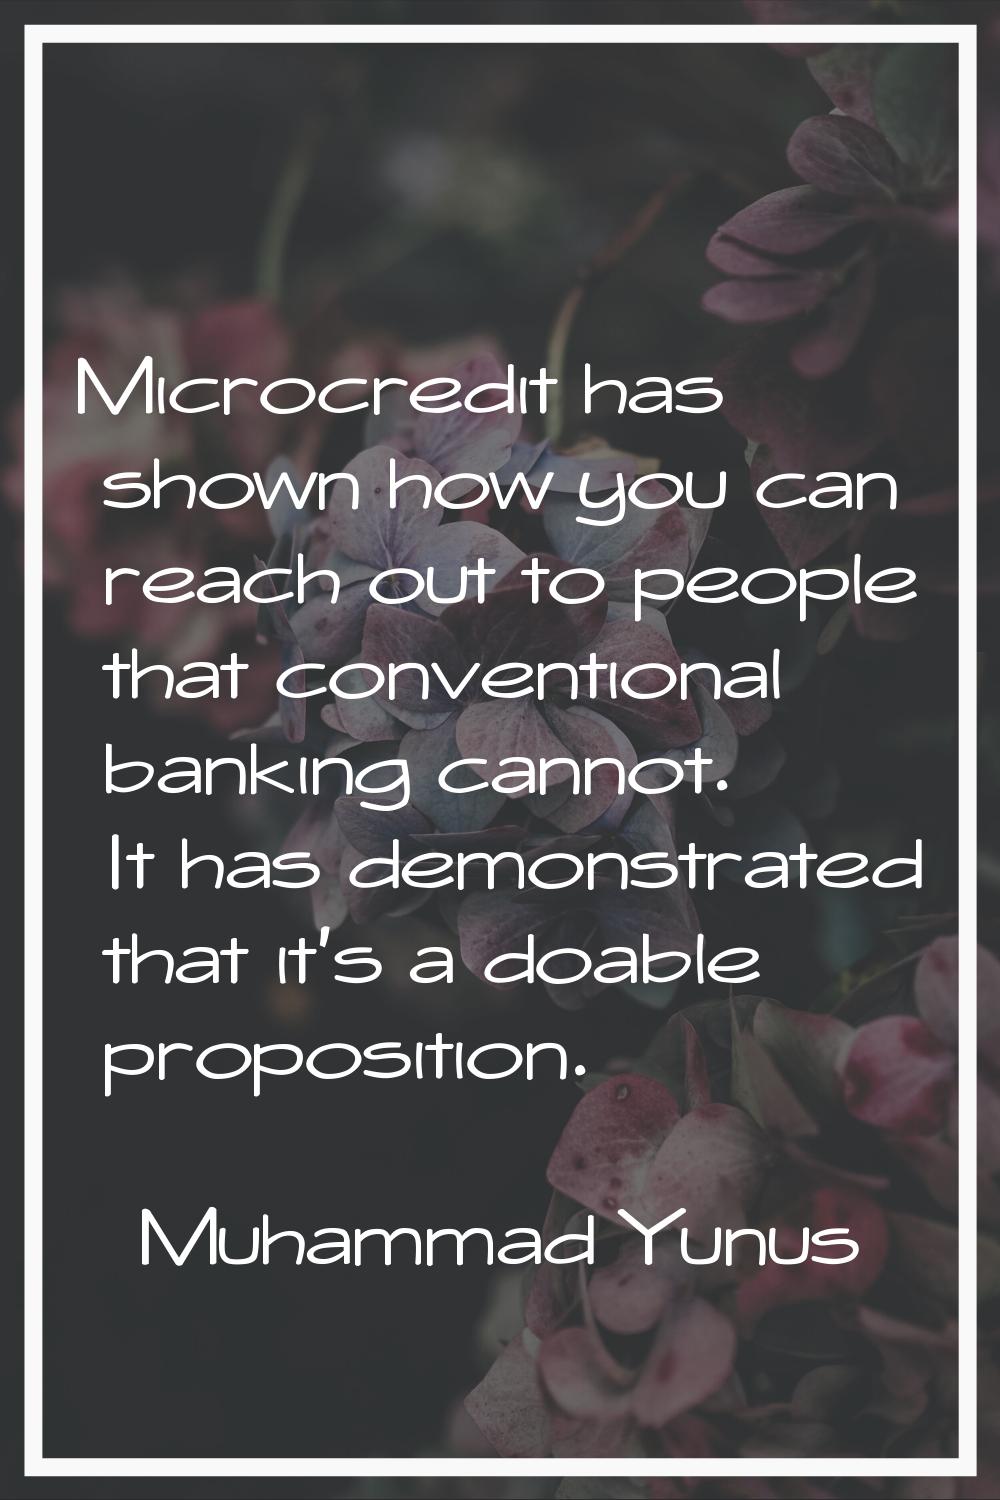 Microcredit has shown how you can reach out to people that conventional banking cannot. It has demo